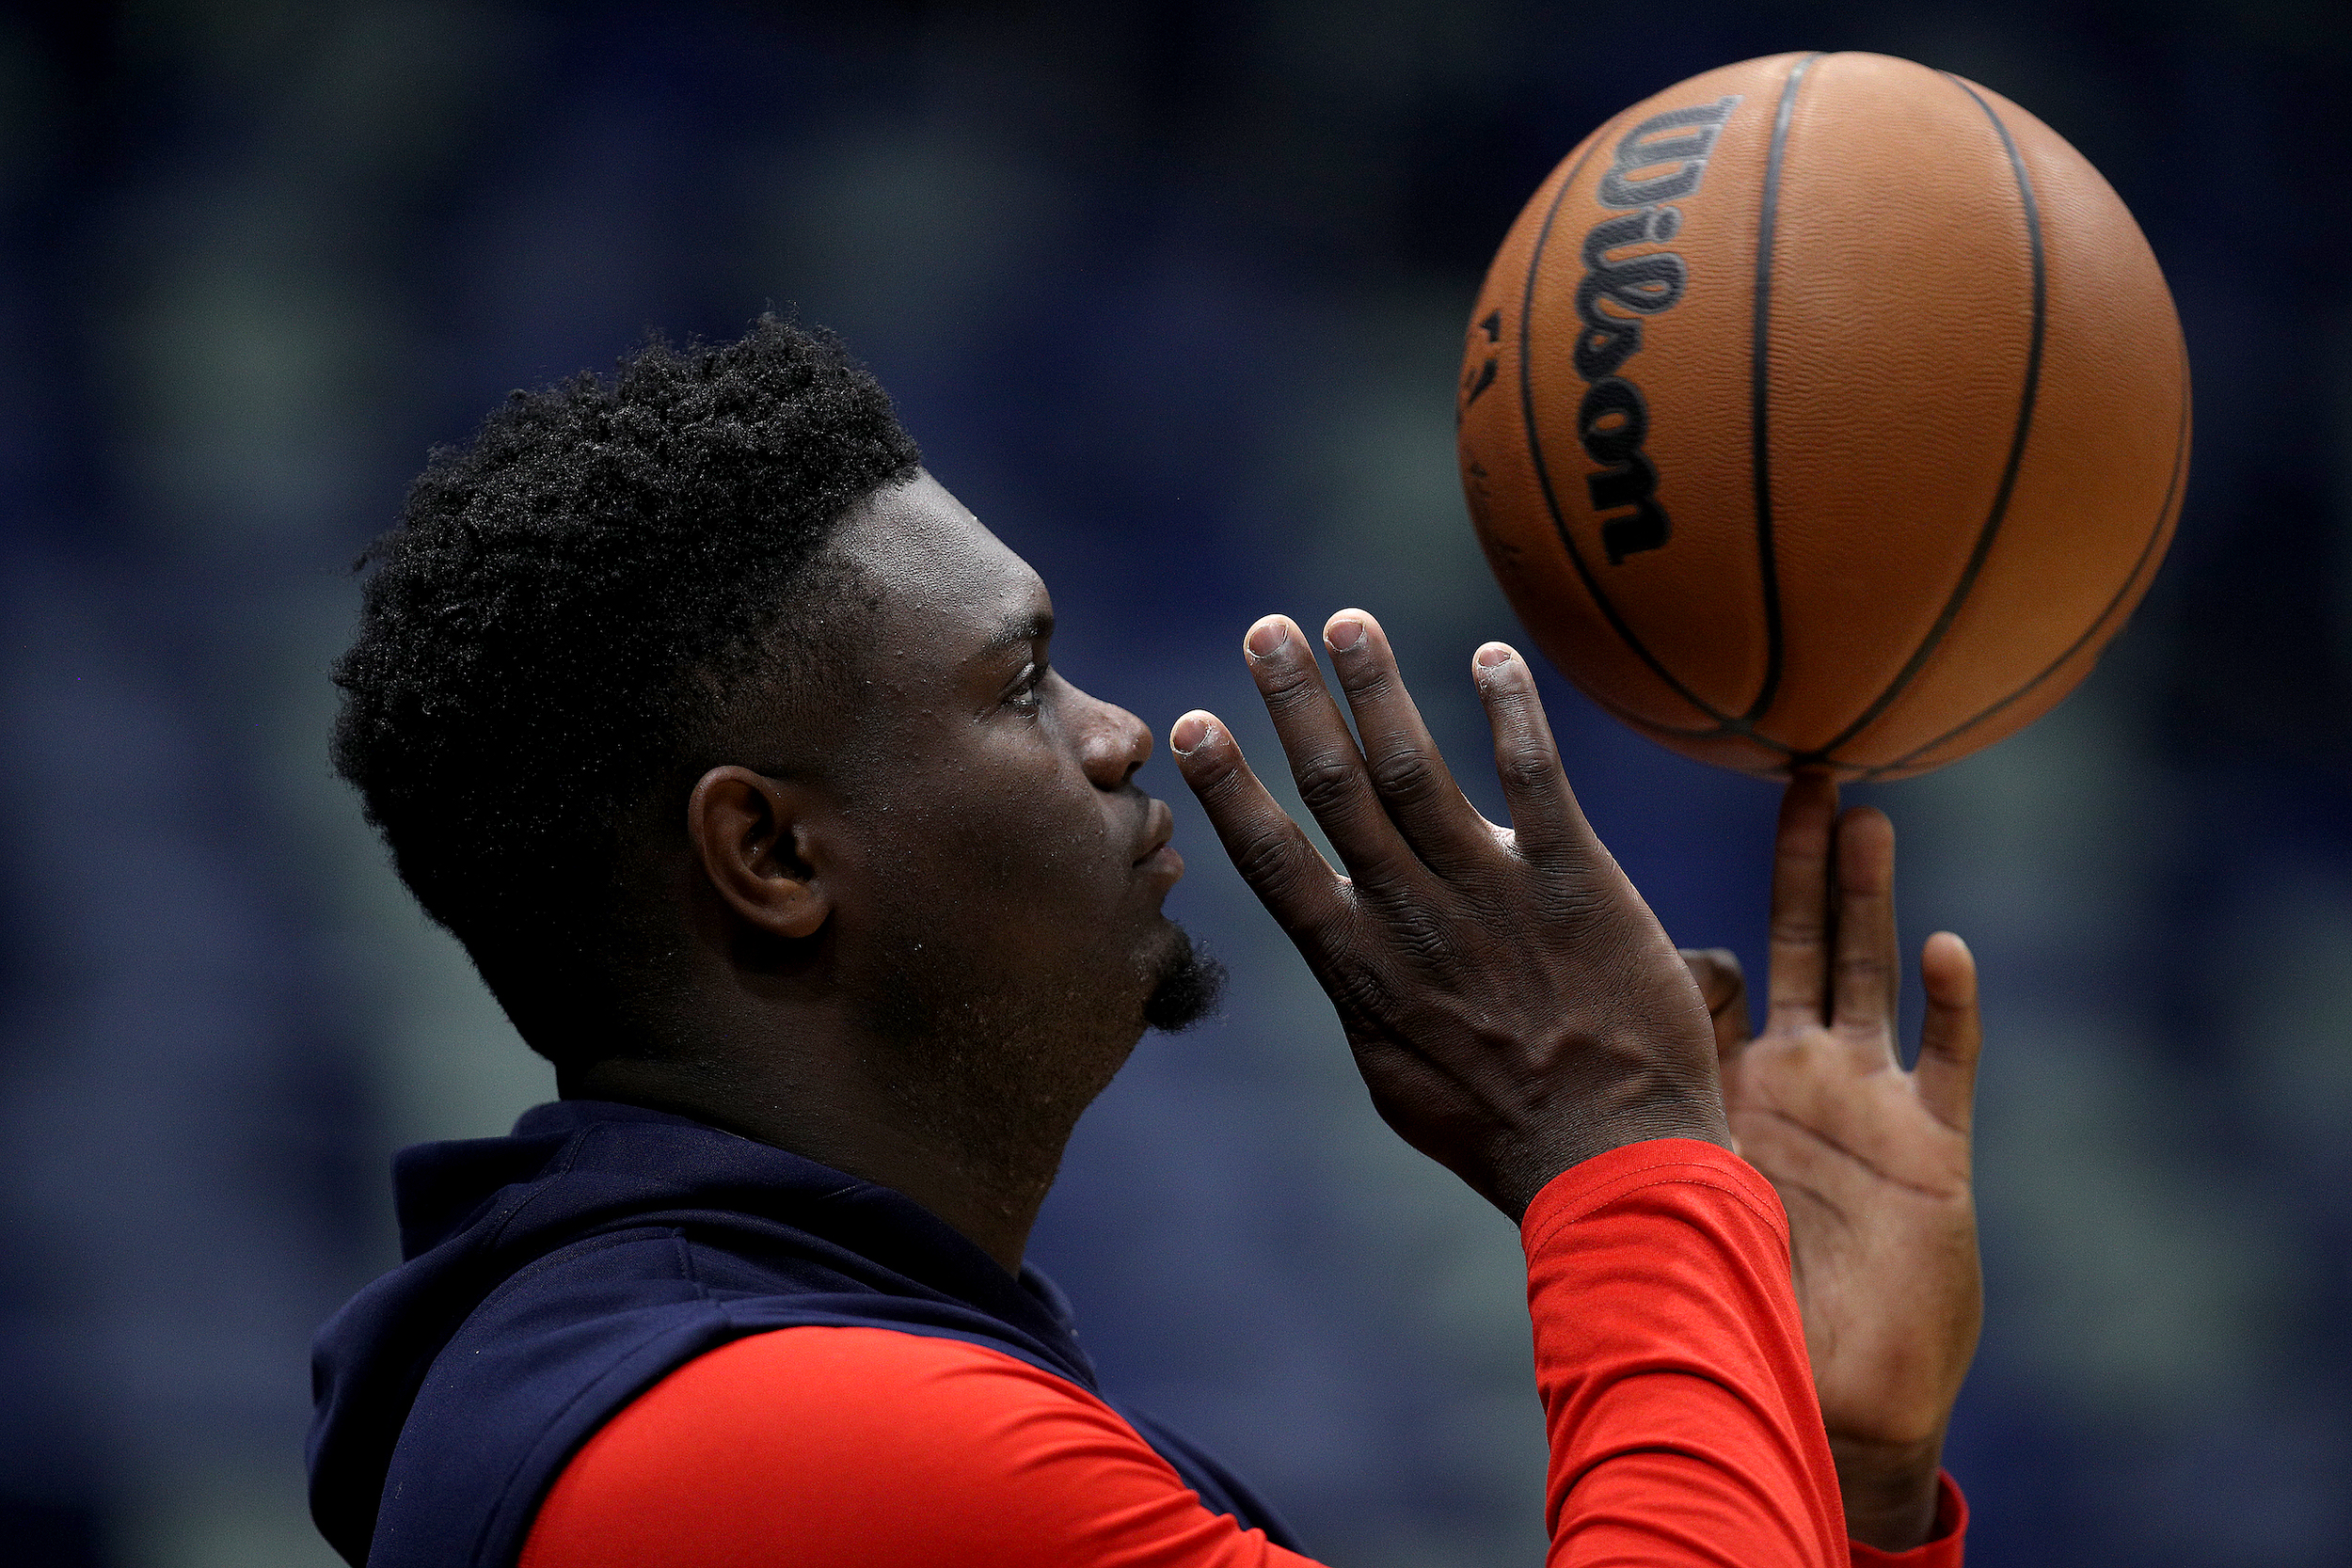 New Orleans Pelicans star Zion Williamson shoots around before an NBA game against the Memphis Grizzlies in November 2021